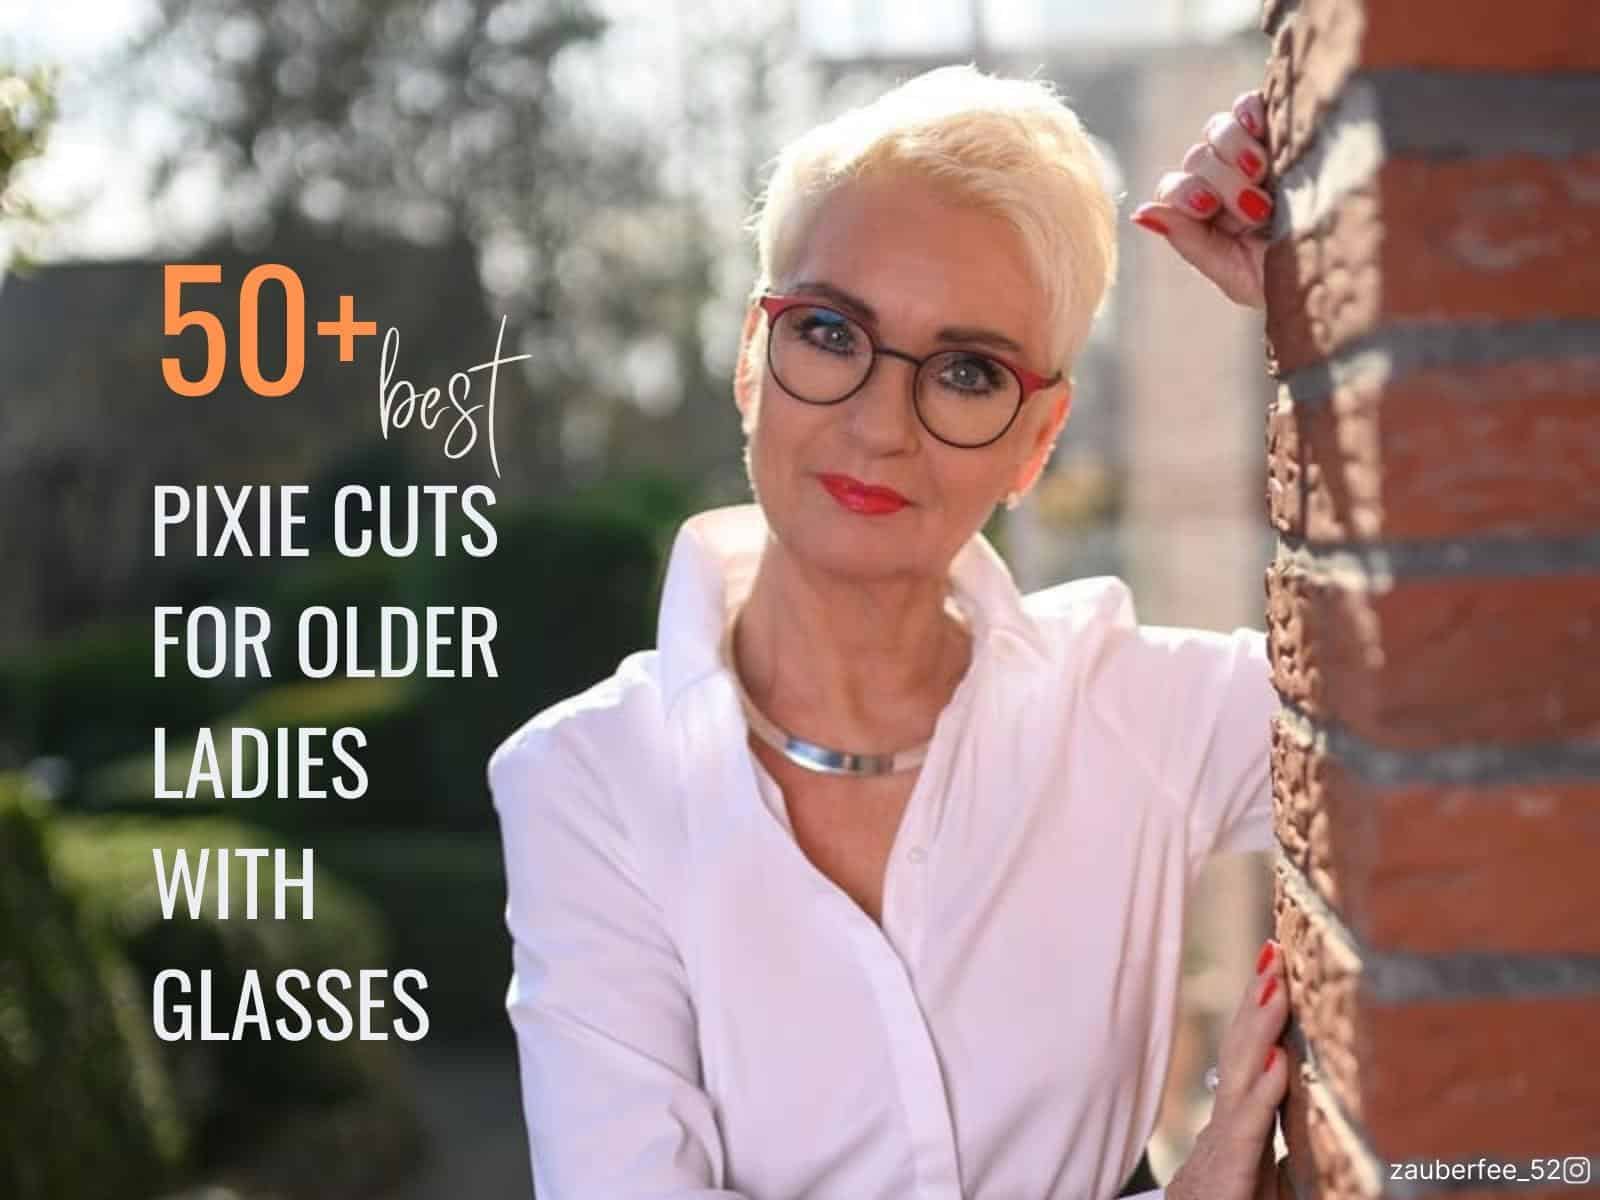 50+ Best Pixie Cuts For Older Ladies With Glasses